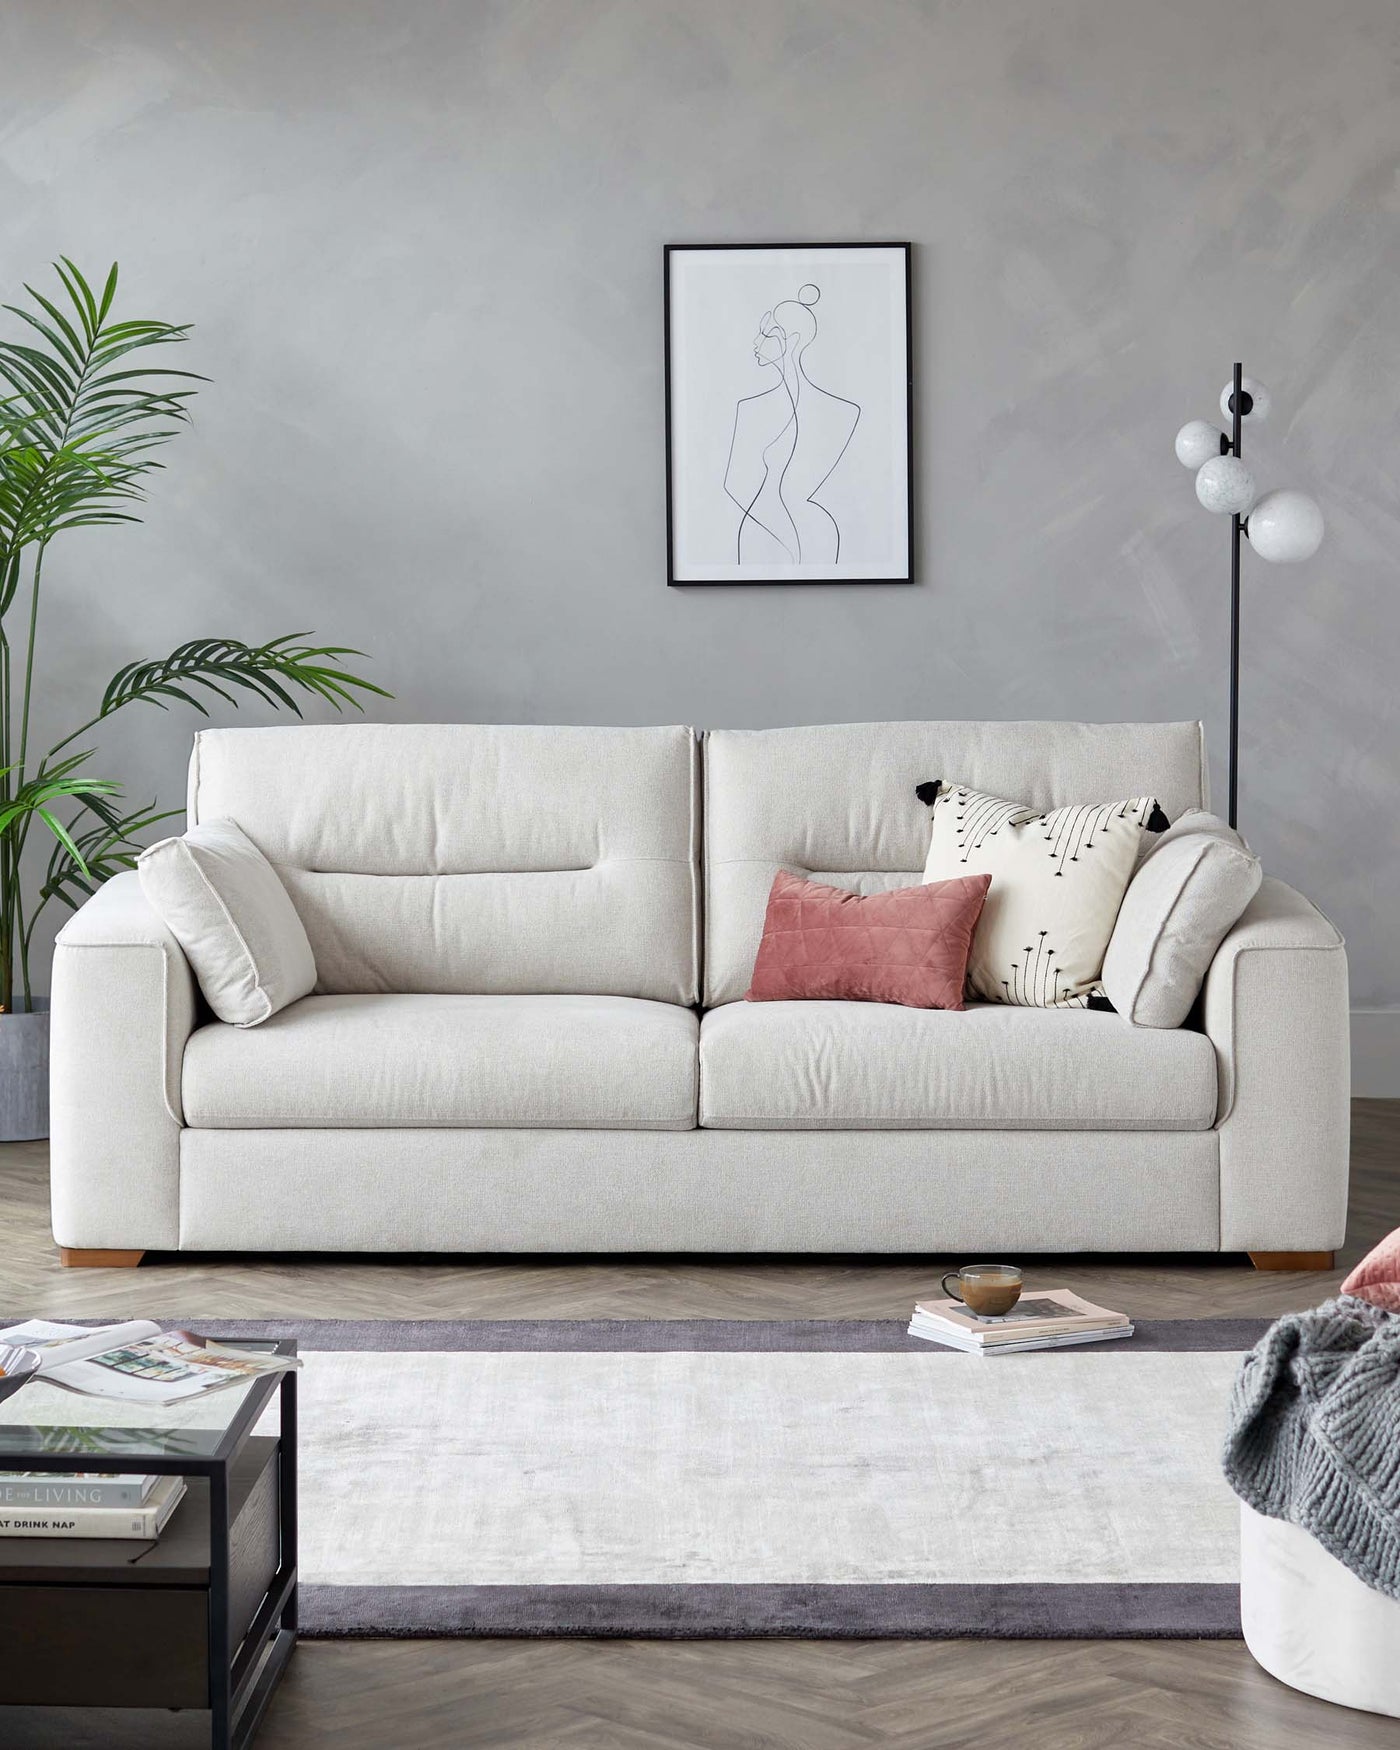 A contemporary light grey fabric three-seater sofa with plush cushions, flanked by patterned and solid-coloured decorative throw pillows. In front of the sofa lies a neutral colour area rug, and to the side, a modern black floor lamp with spherical white shades.